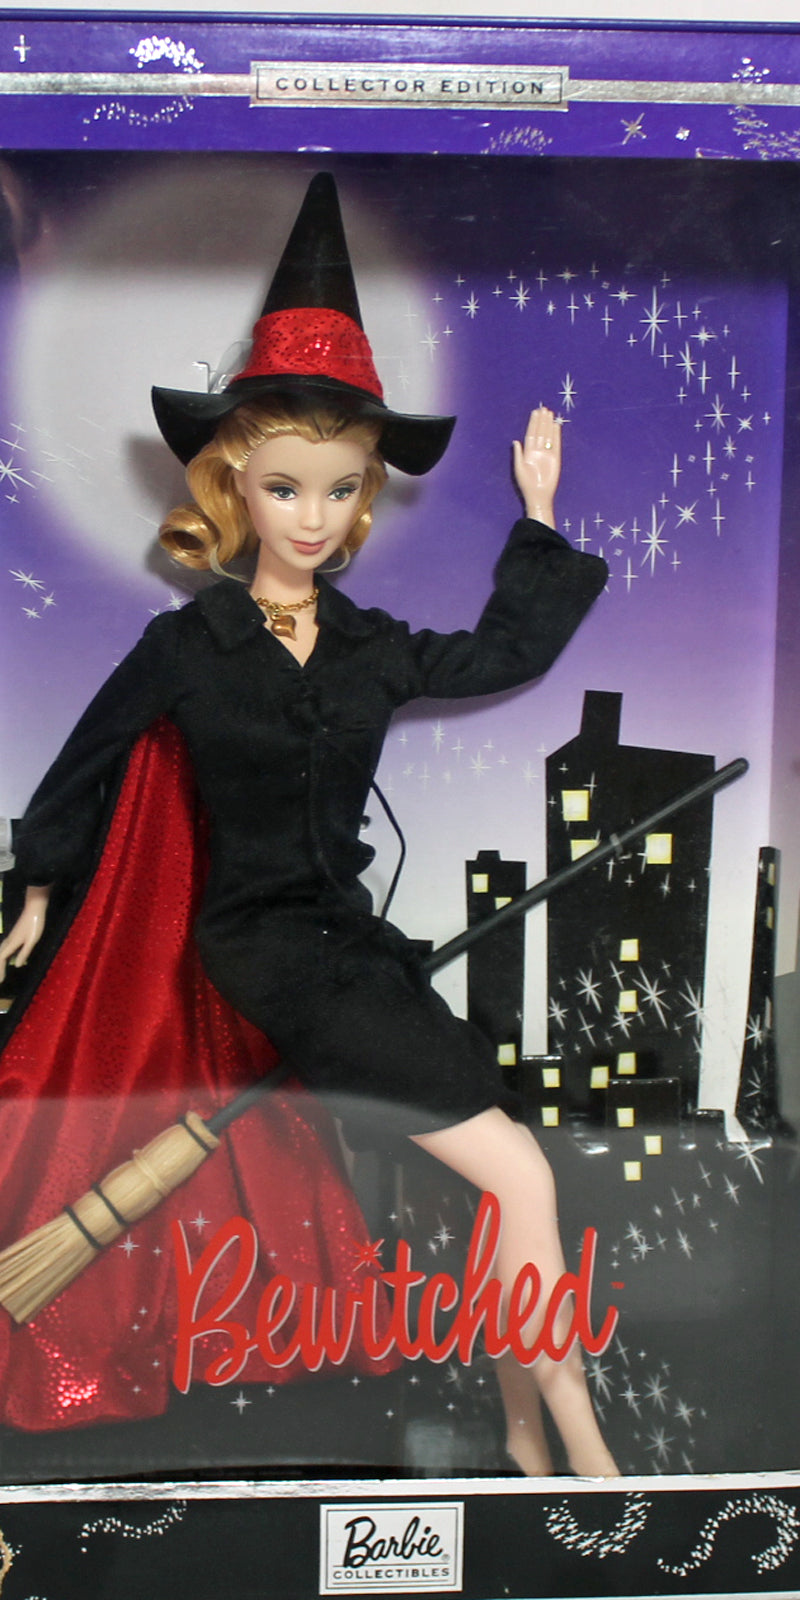 2001 Bewitched Barbie (53510)